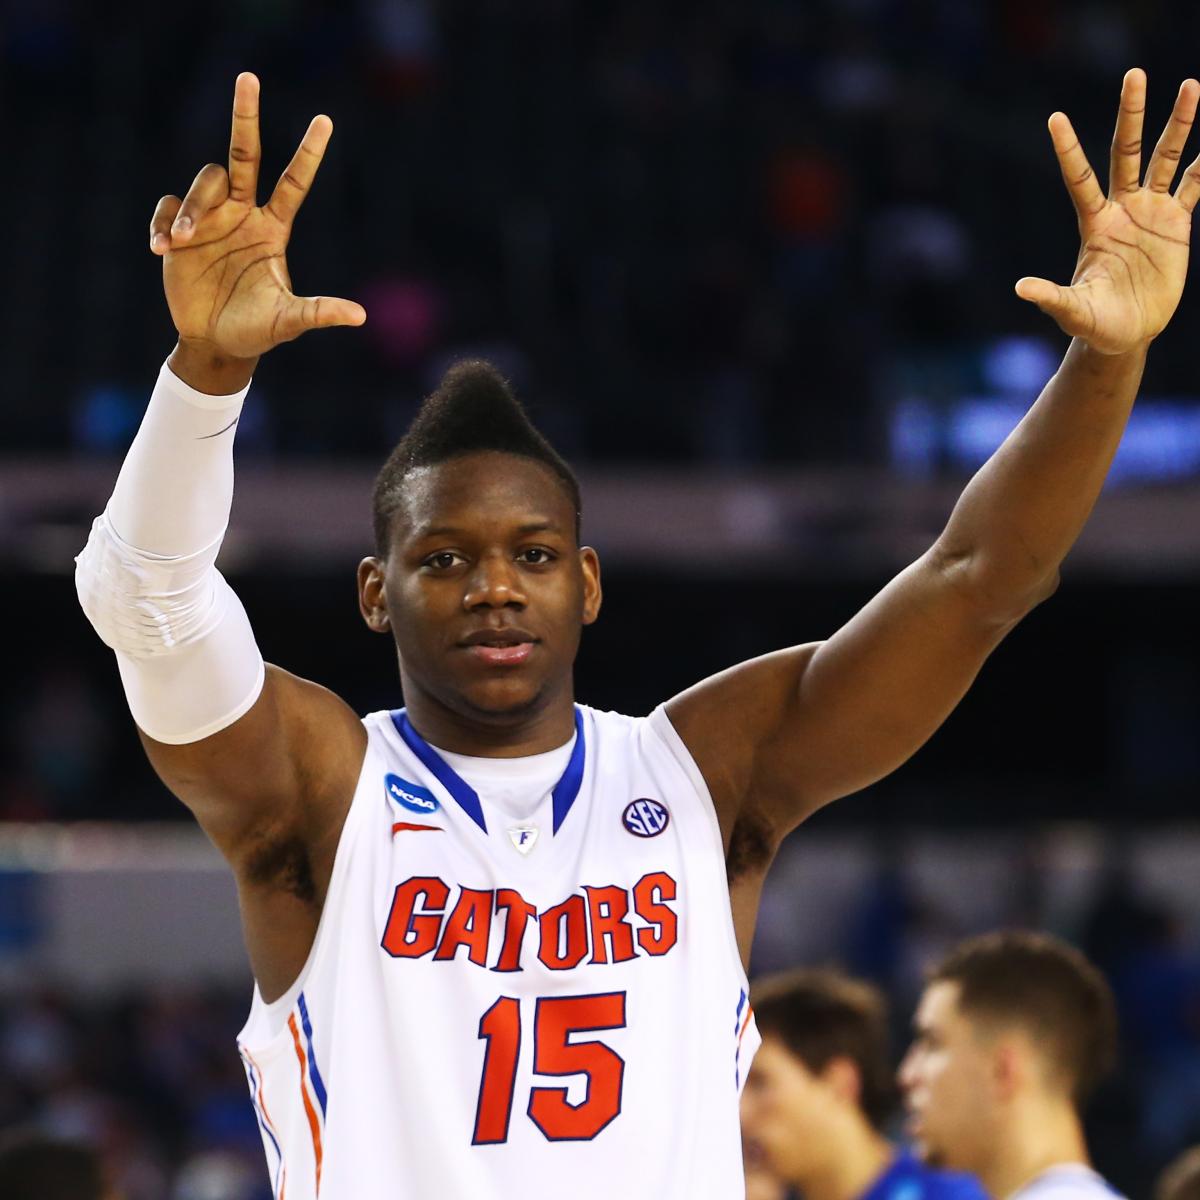 Florida Basketball Complete Roster, Season Preview for 201314 Gators